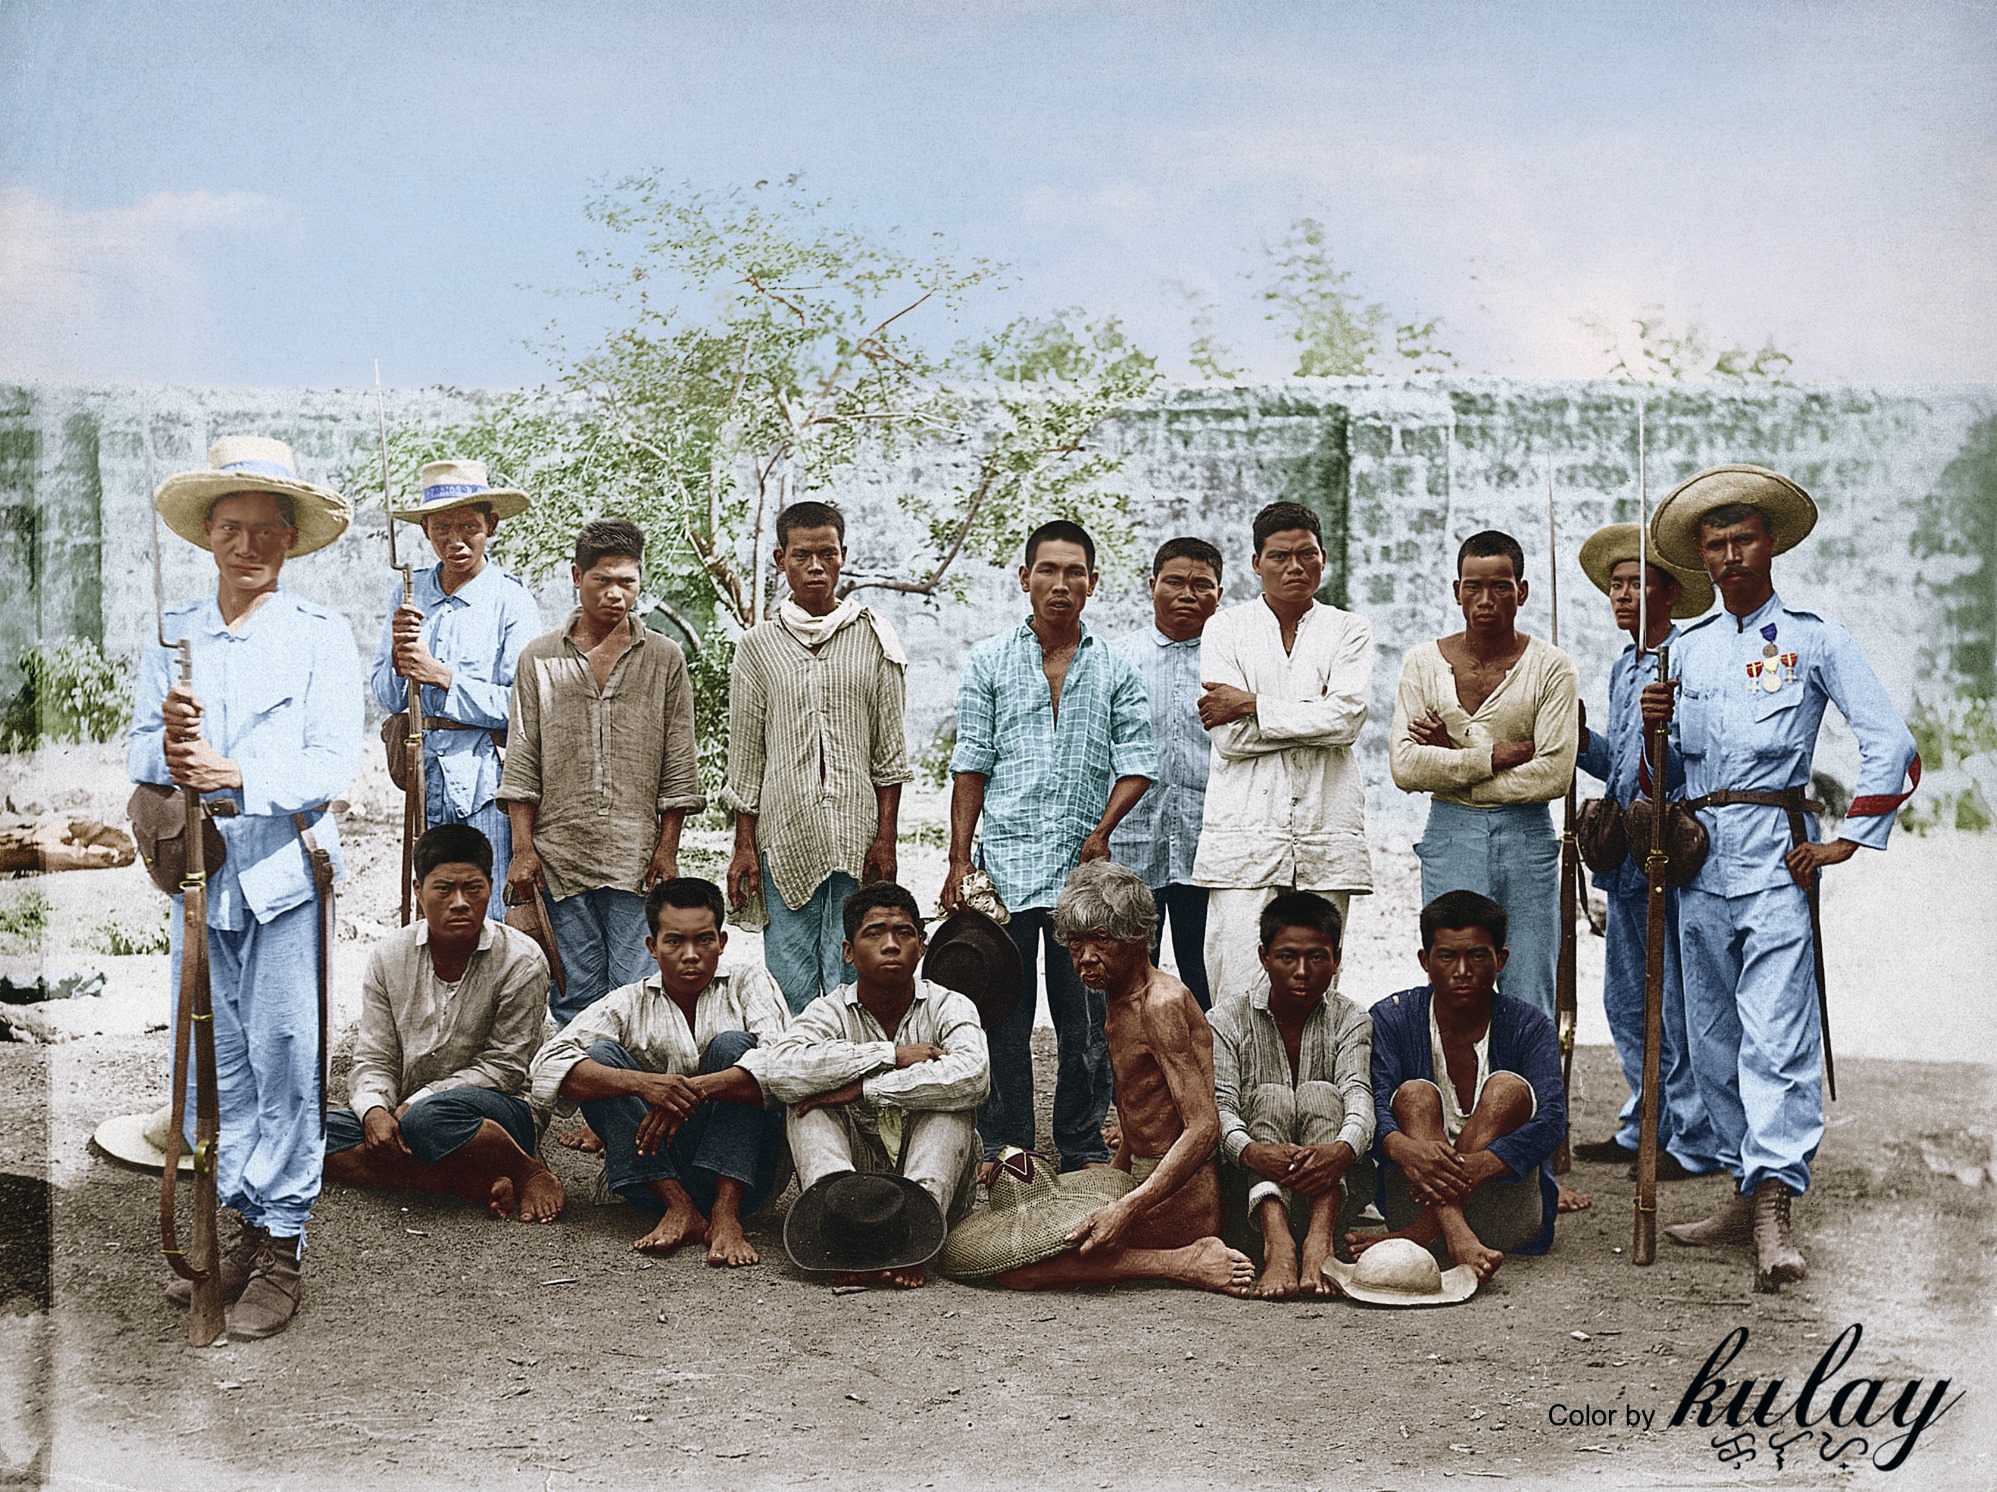 These Historic Photos Were Colorized By A Filipino Engineer